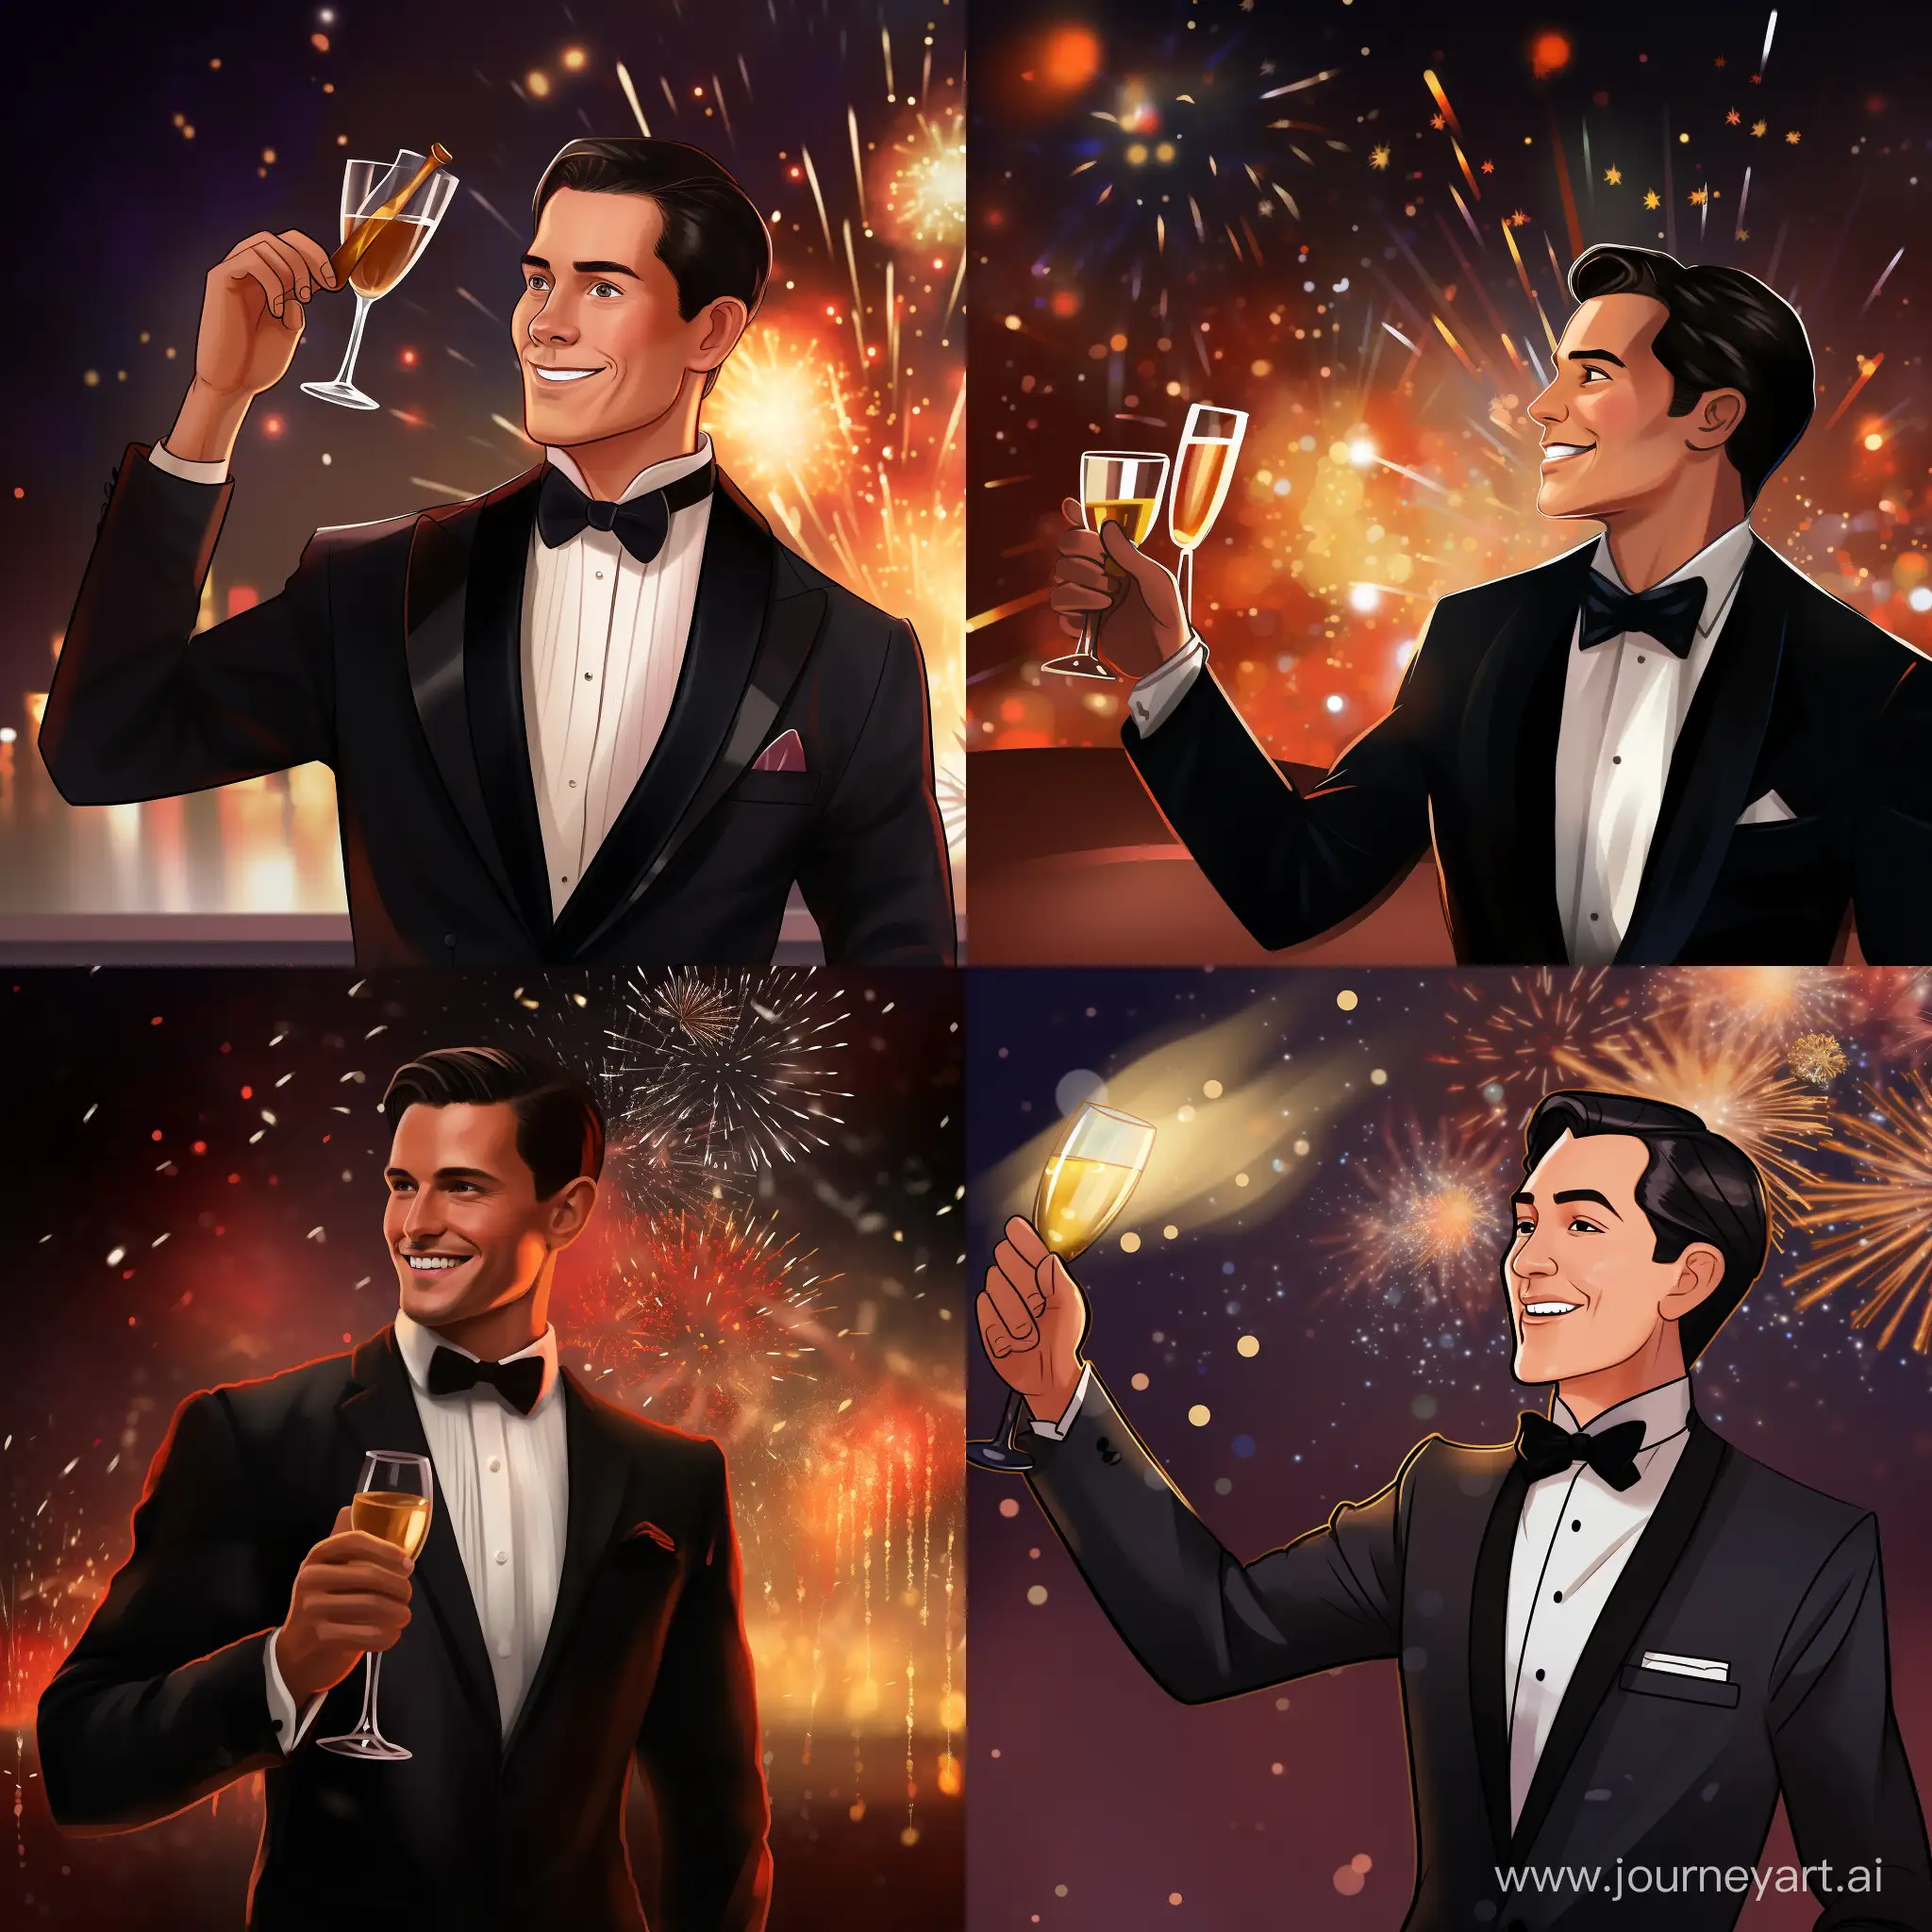 Elegant-Man-Toasting-with-Fireworks-in-Cartoon-Style